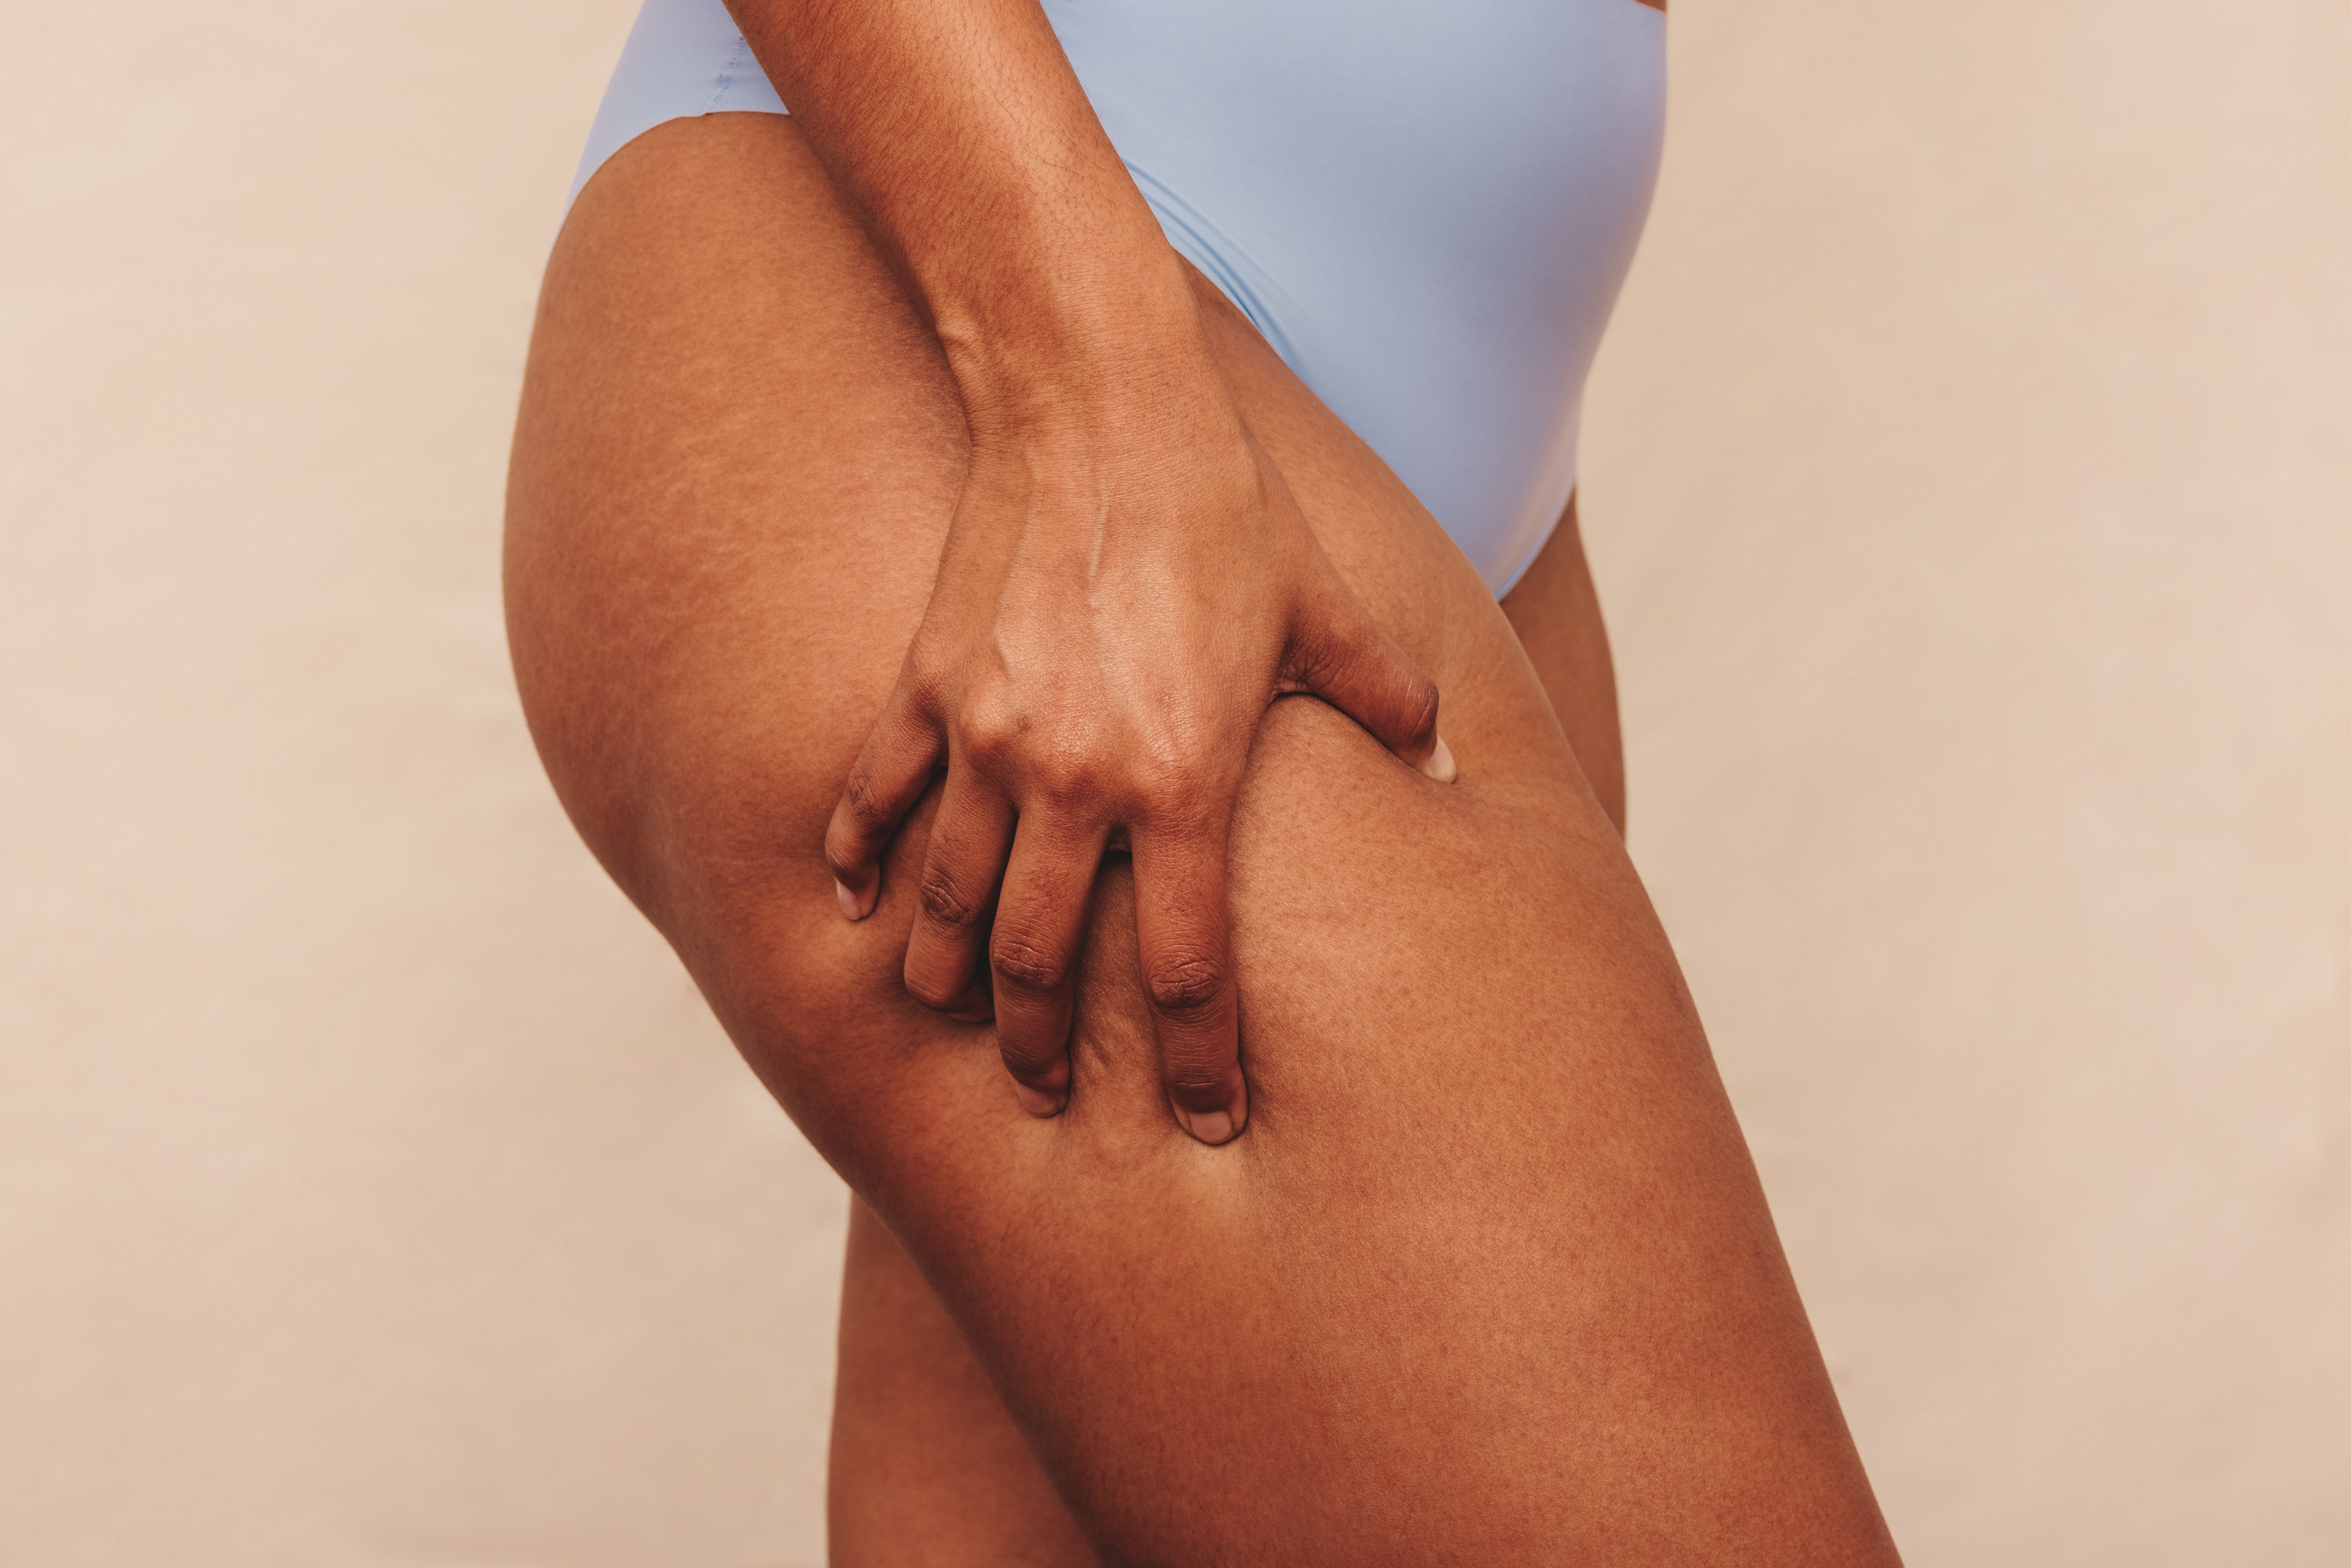 Woman with cellulite holding her thighs